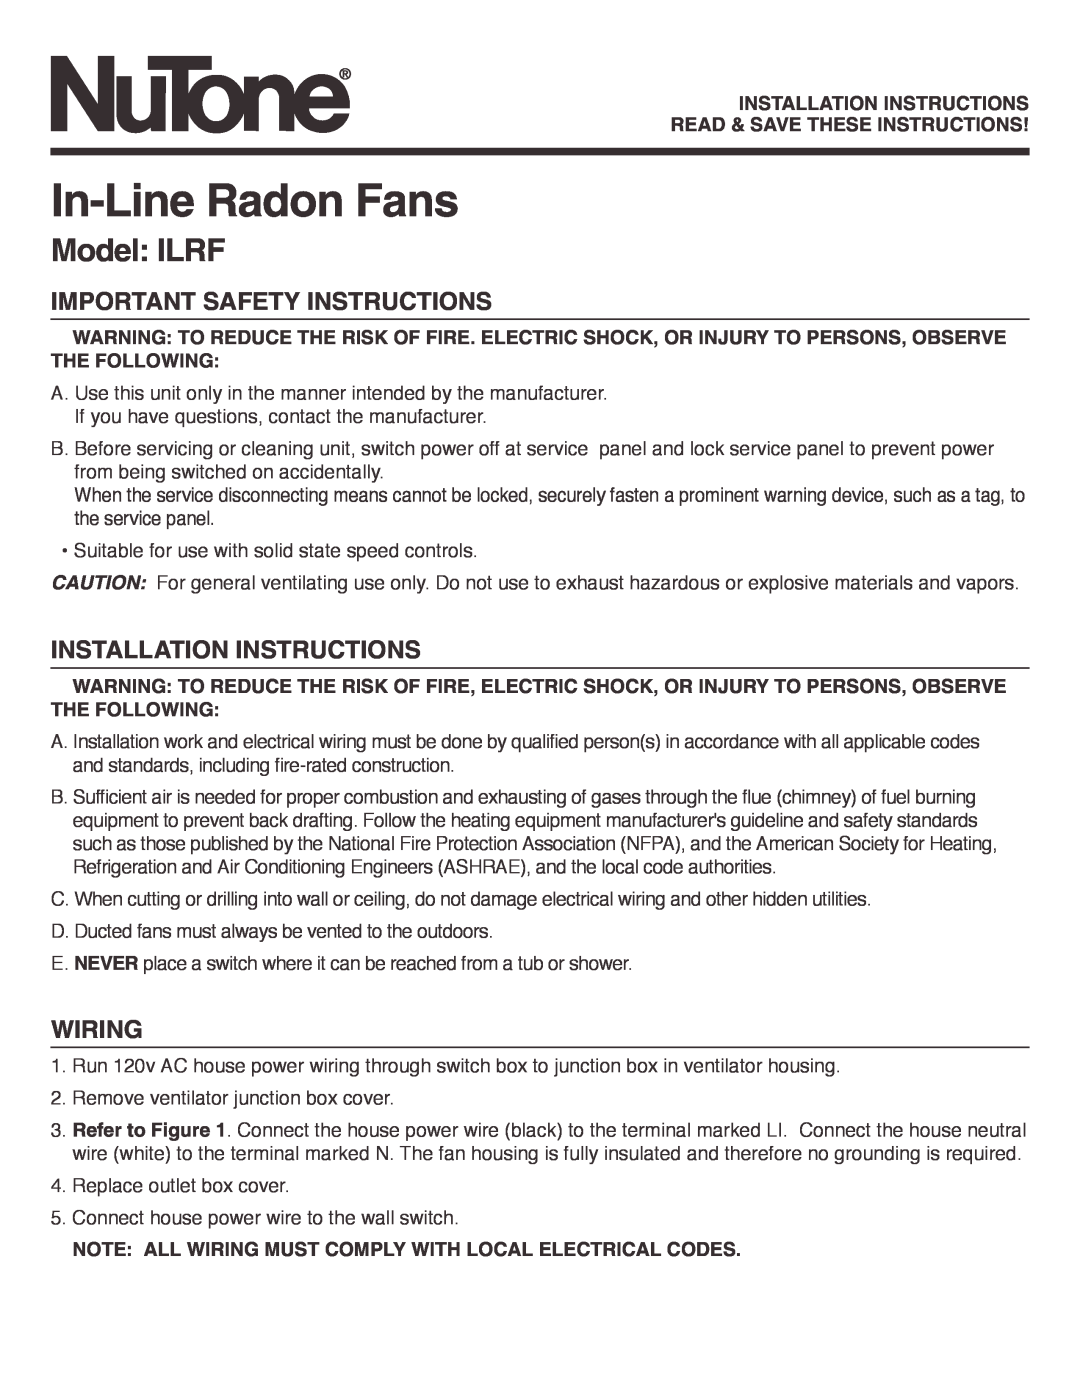 NuTone important safety instructions In-LineRadon Fans, Model ILRF, Important Safety Instructions, Wiring 